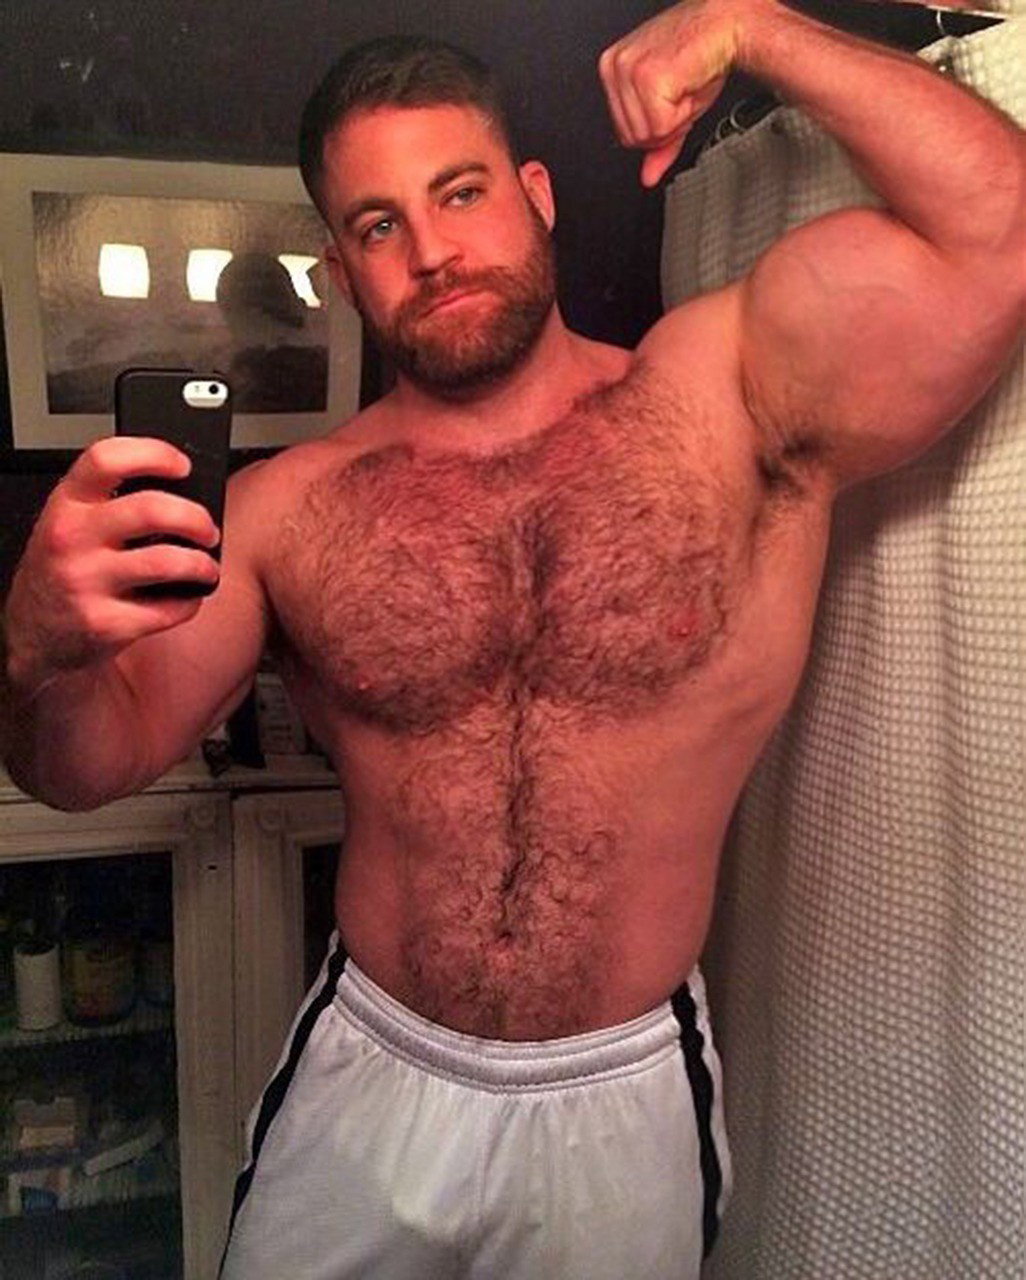 Watch the Photo by Smitty with the username @Resol702, posted on February 1, 2019. The post is about the topic Gay Hairy Men.